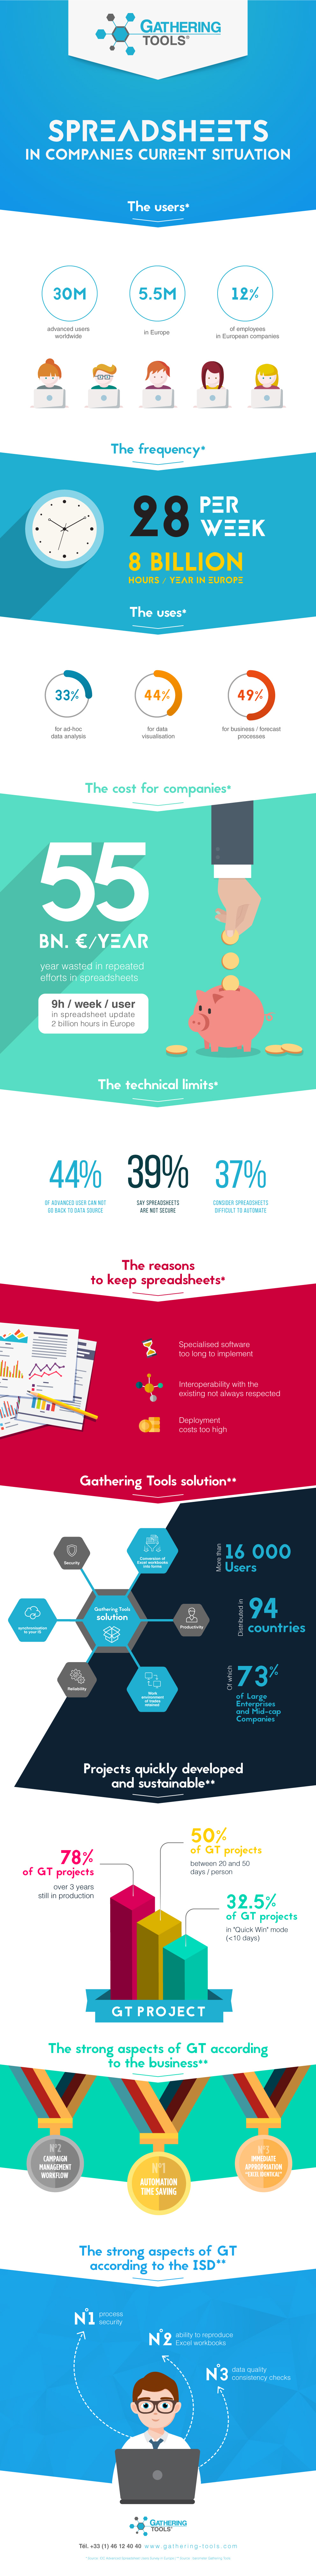 Uses of spreadsheets in companies 